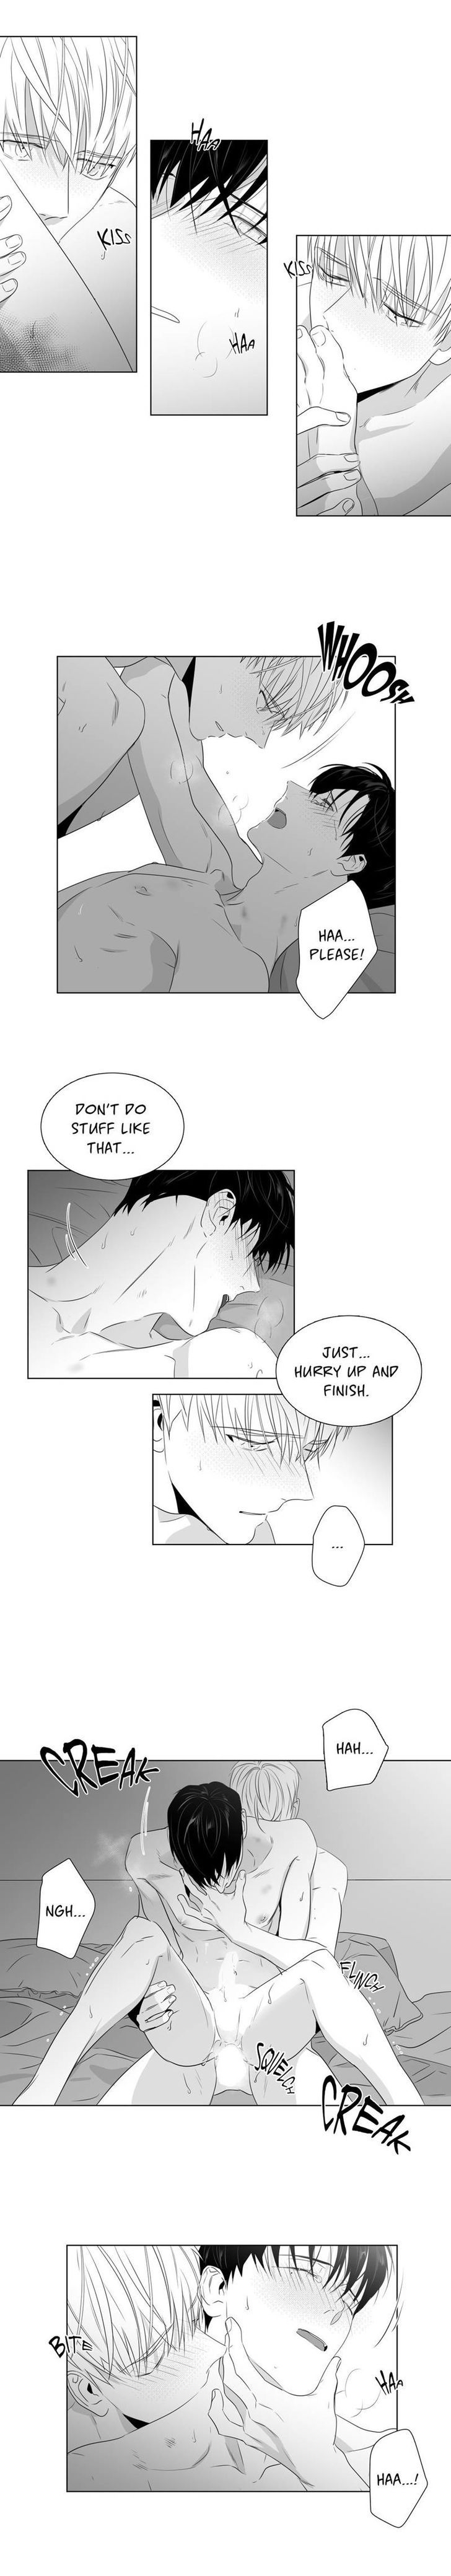 Lover Boy (Lezhin) Chapter 047 page 6